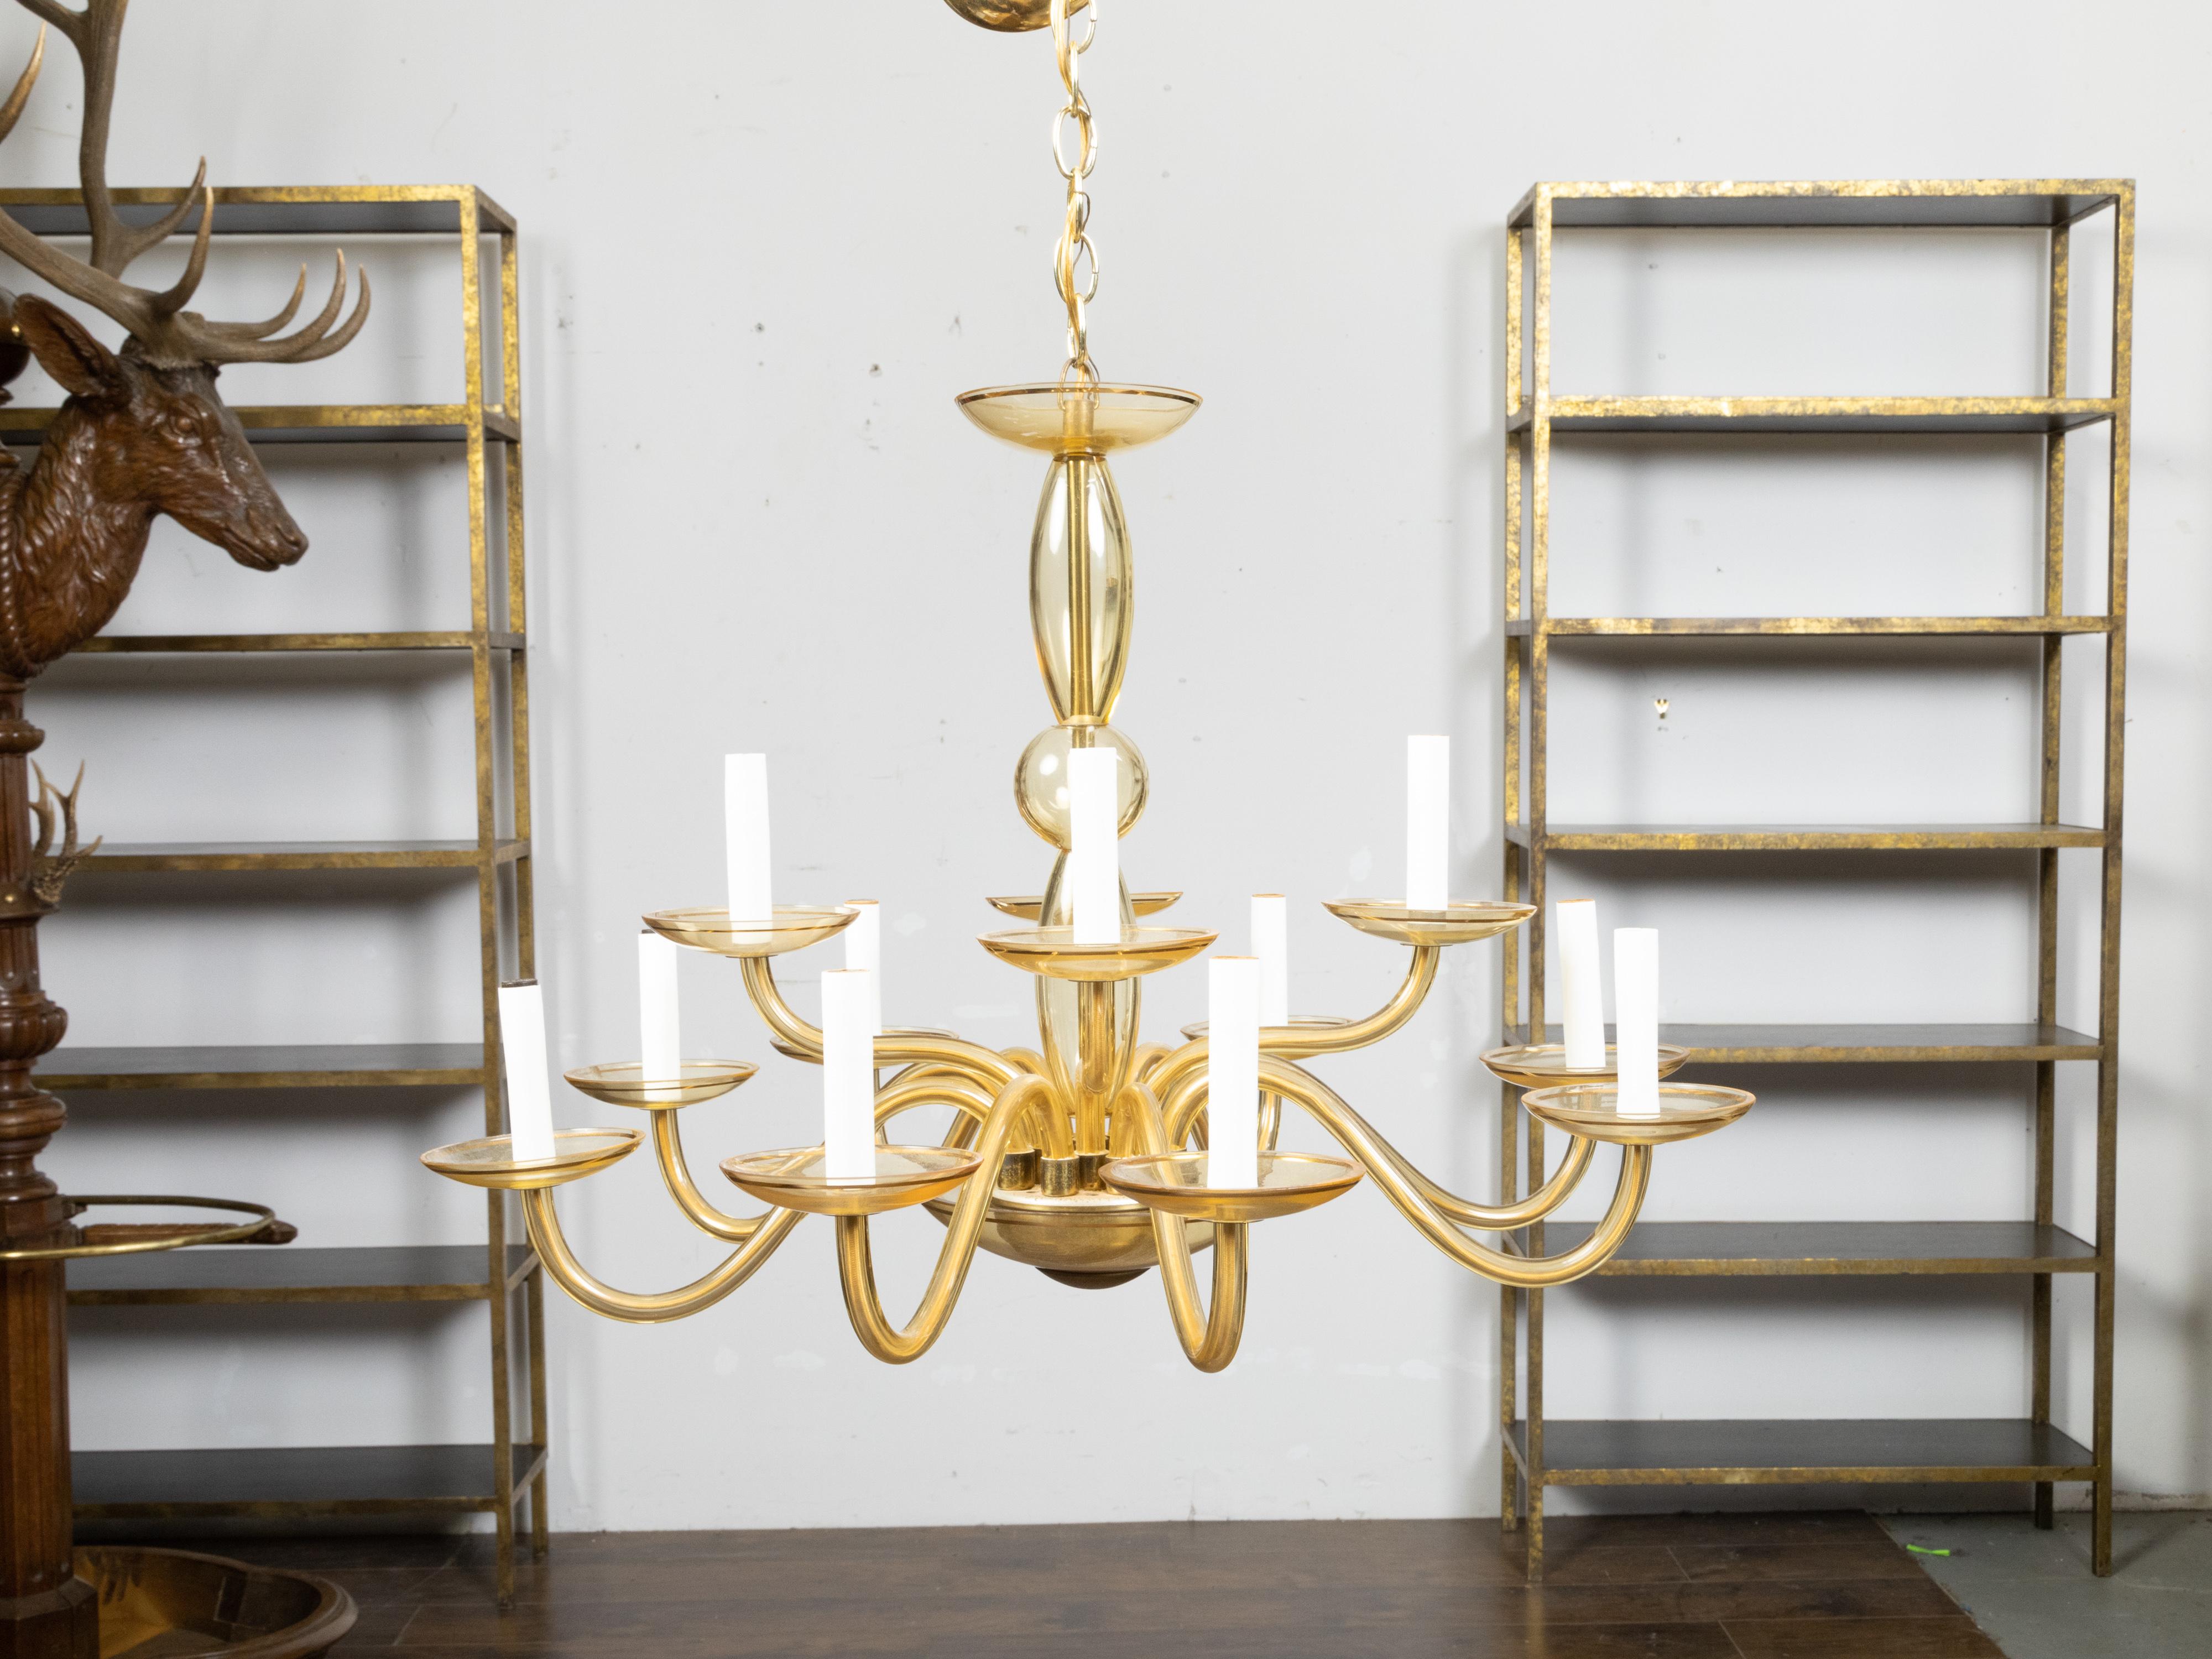 Hand-Crafted Italian Murano Glass Midcentury 12-Light Chandelier with Golden Tones, US Wired